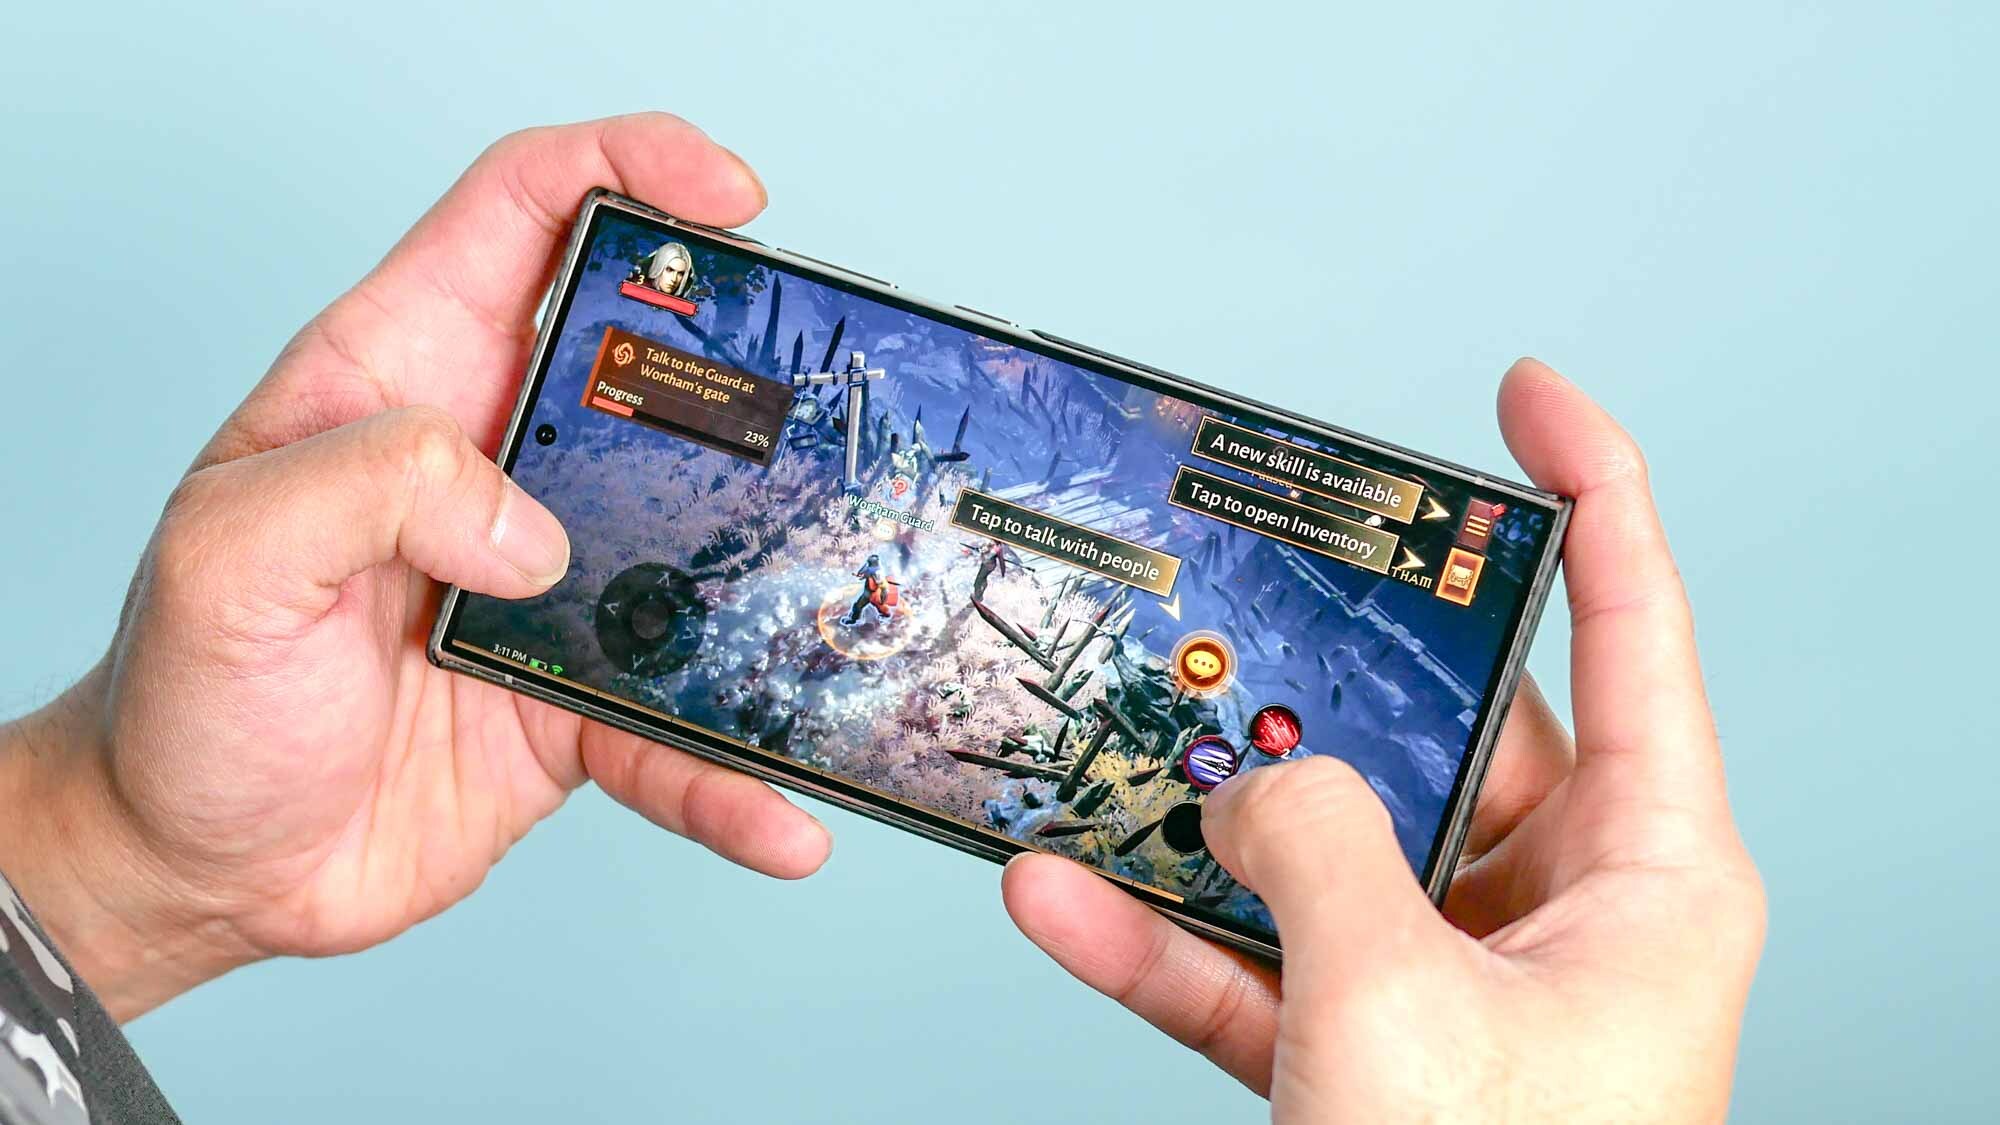 Mobile Games : Fun and Engaging, But Are They Safe?